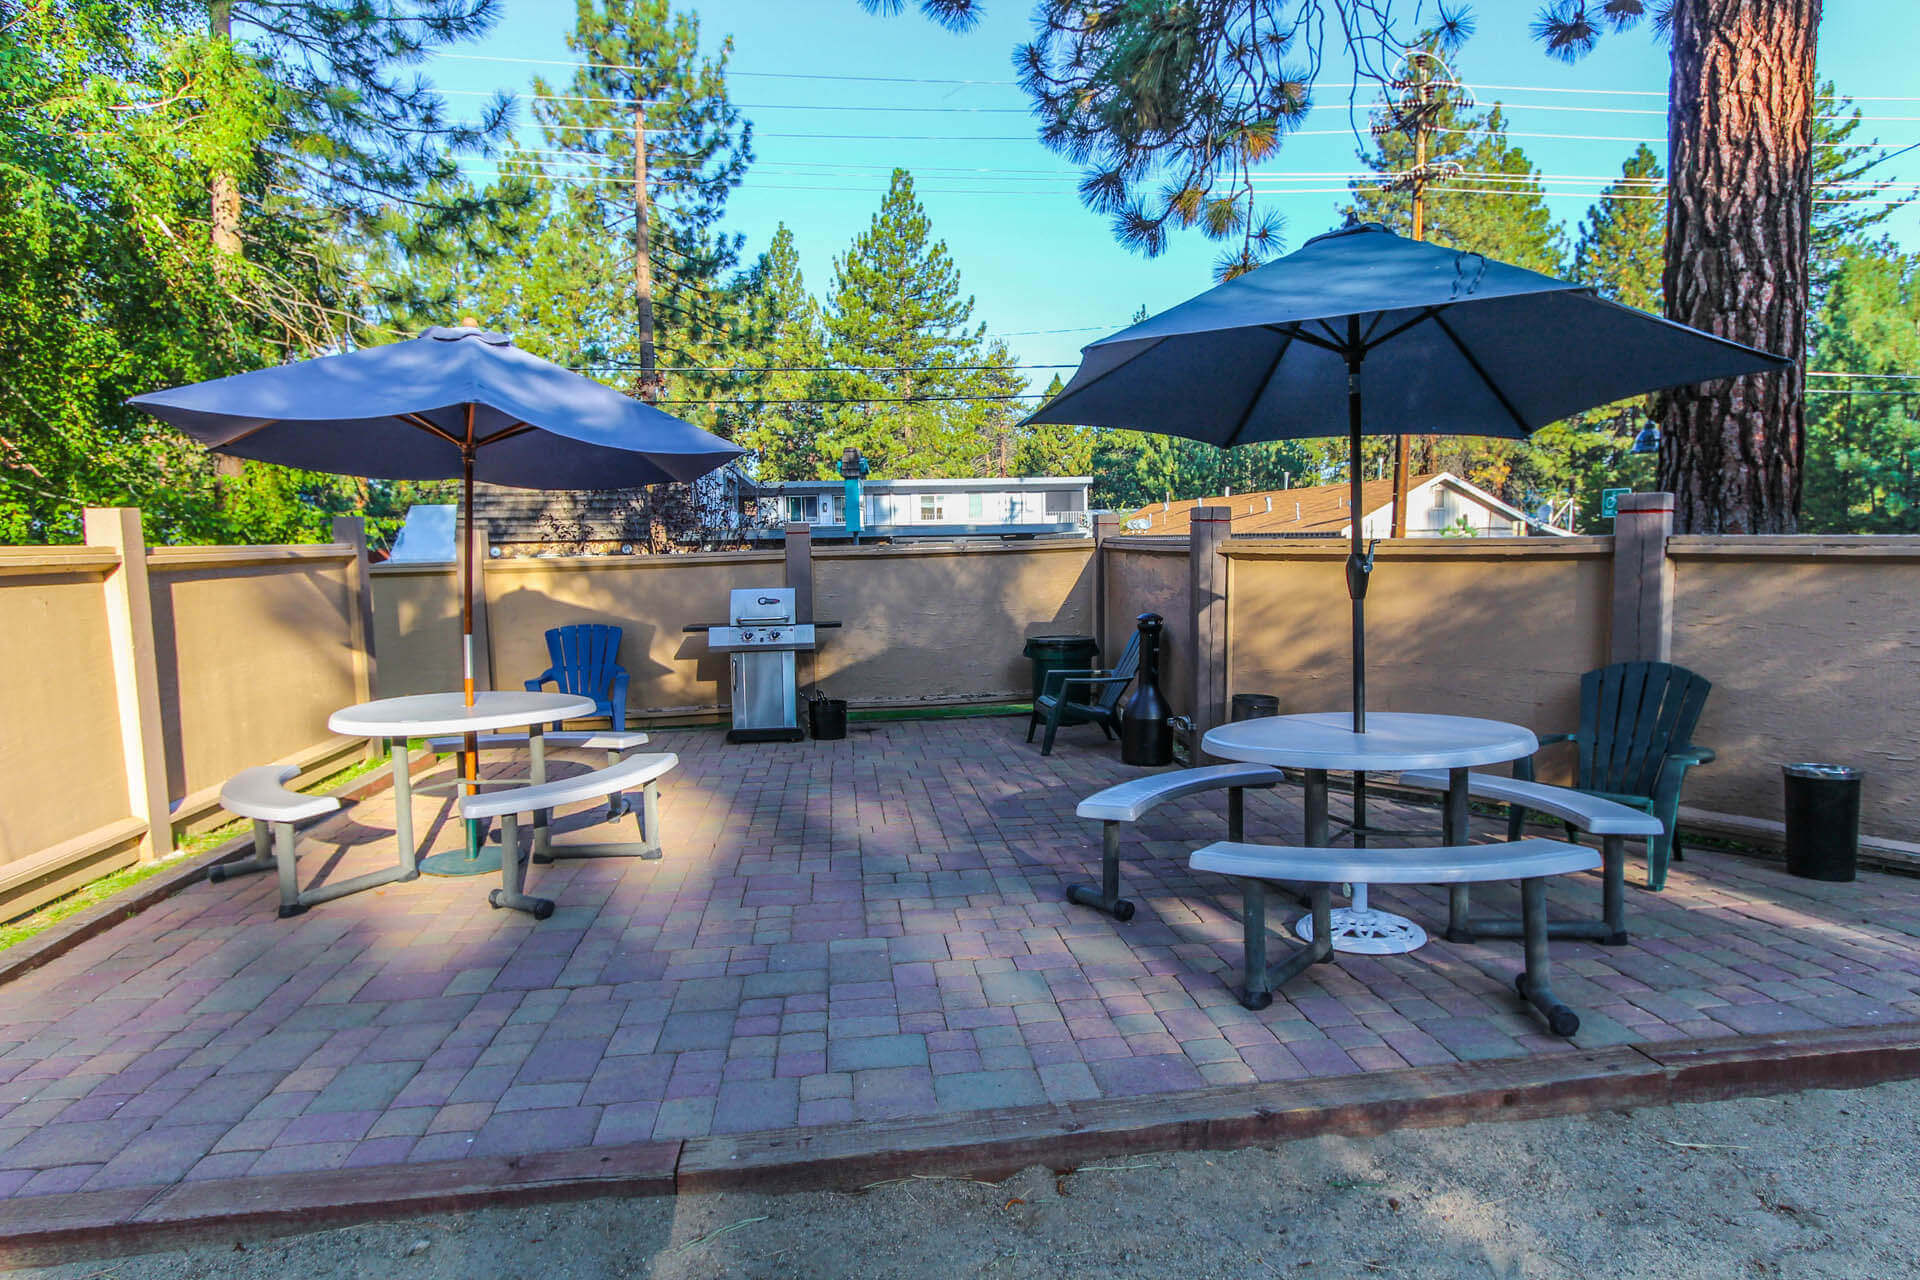 Outdoor BBQ Grills at VRI's The Lodge at Lake Tahoe in California.